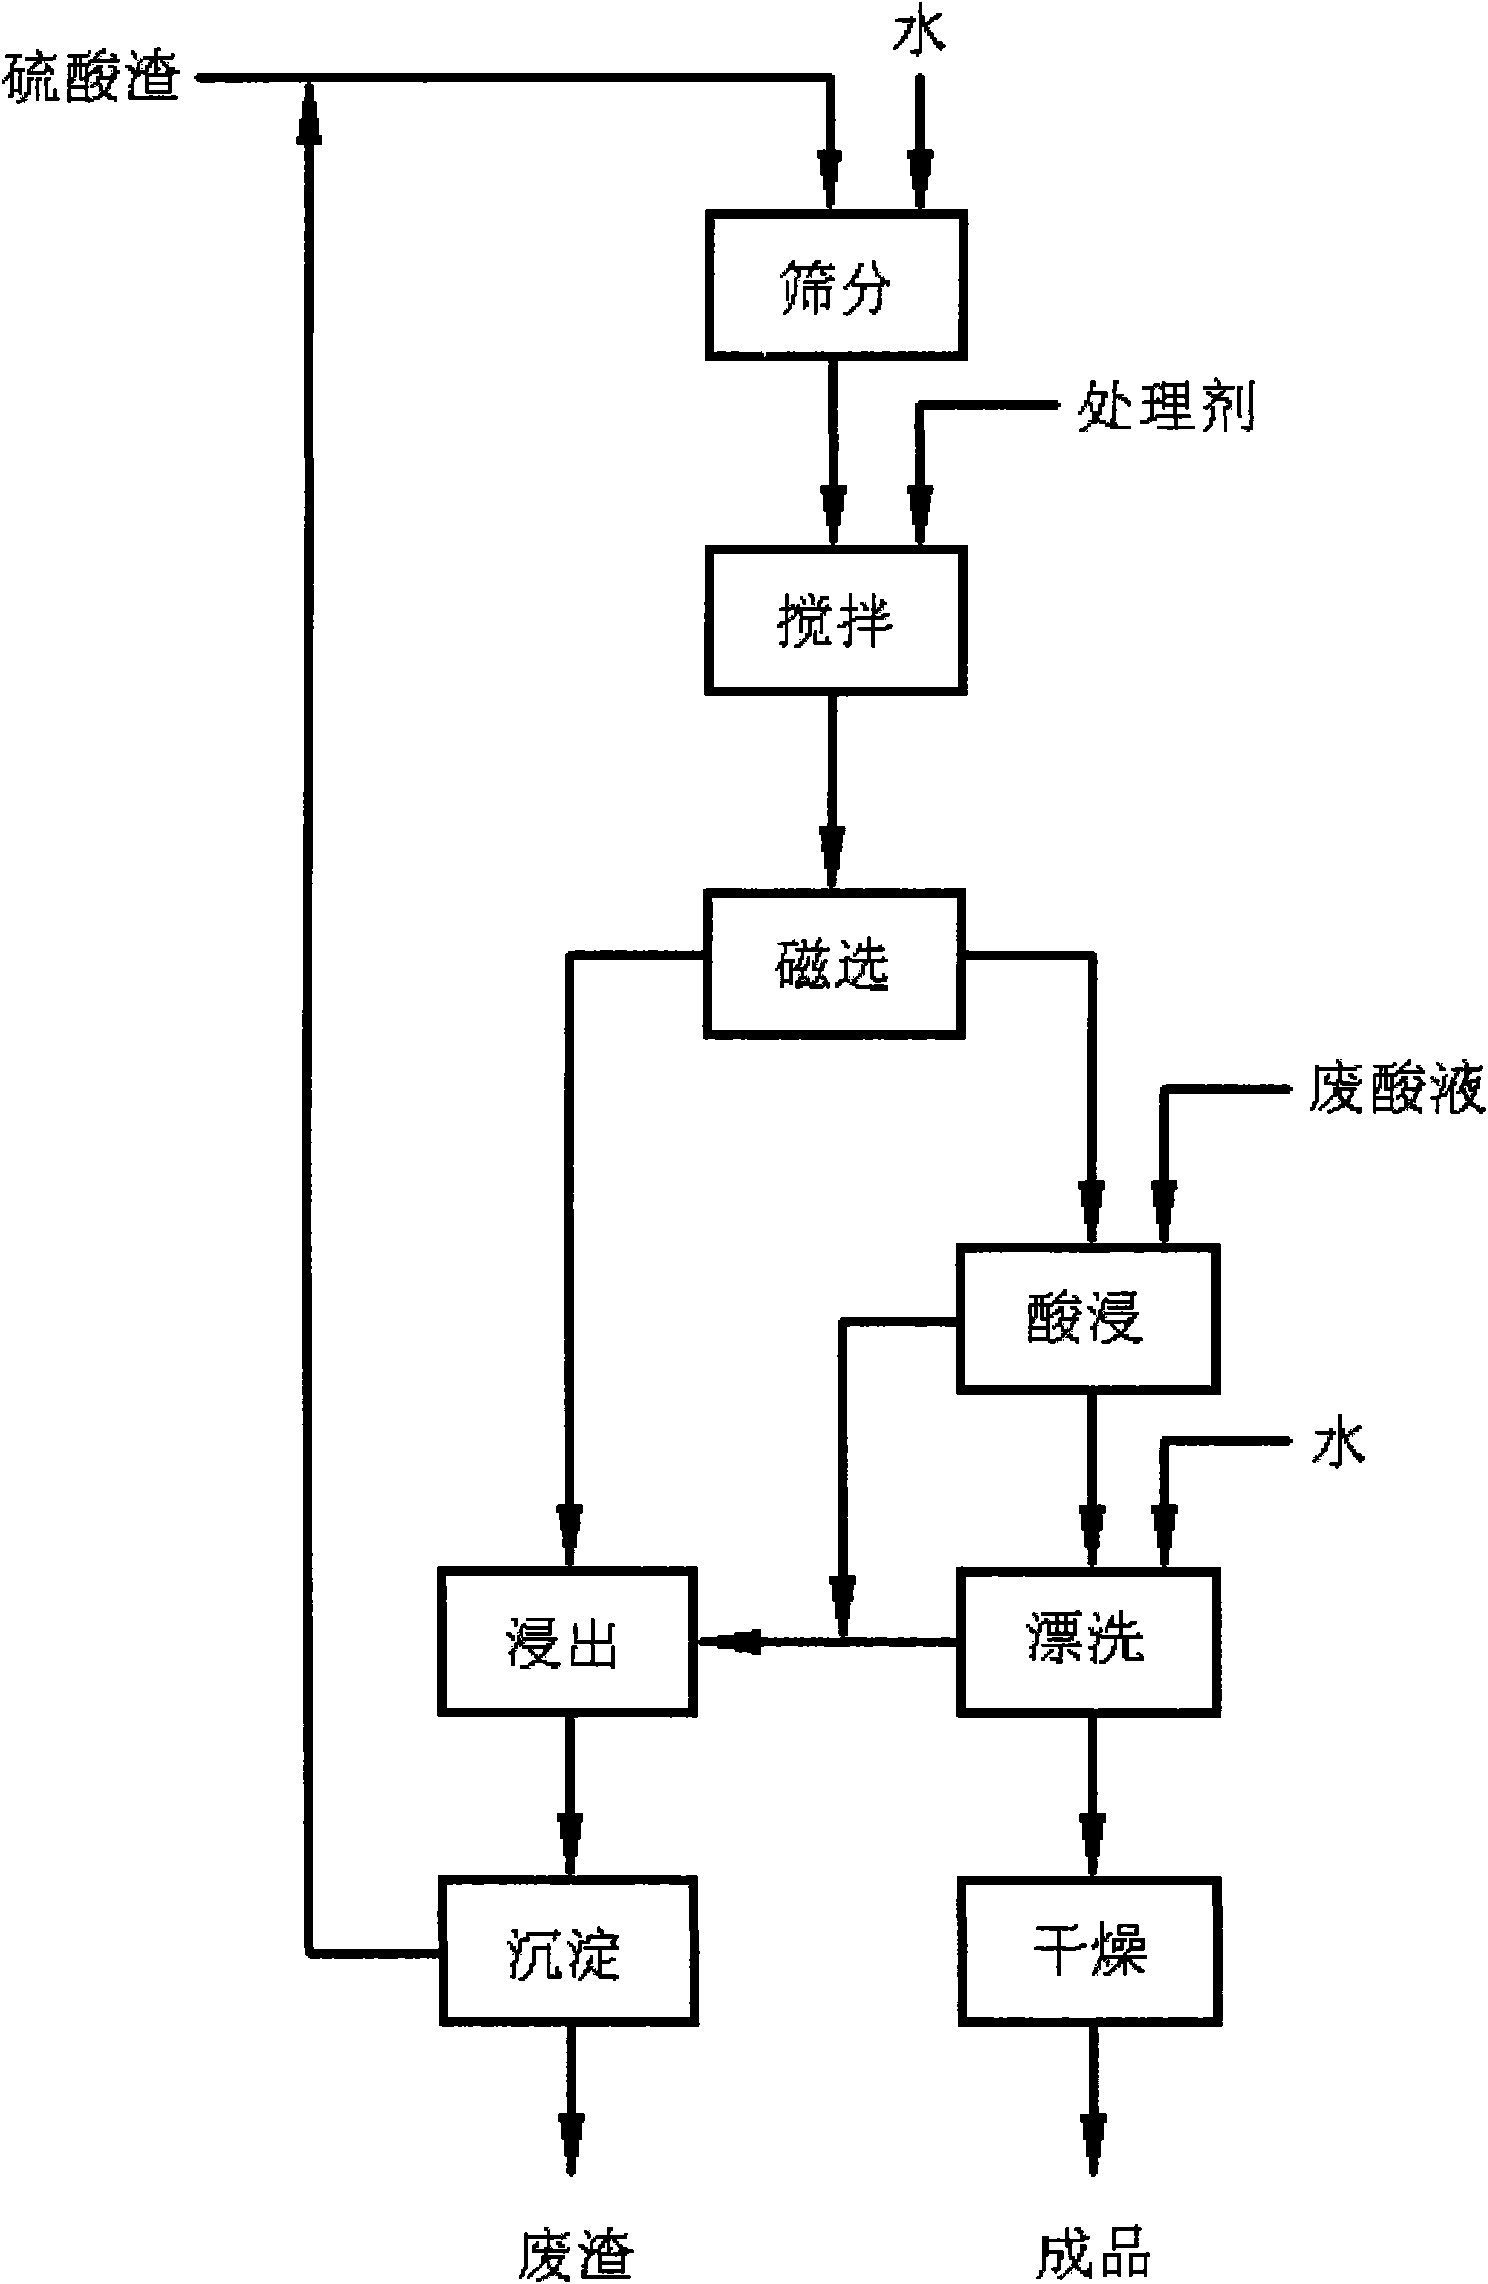 Method for recycling industrial waste sulfate slag